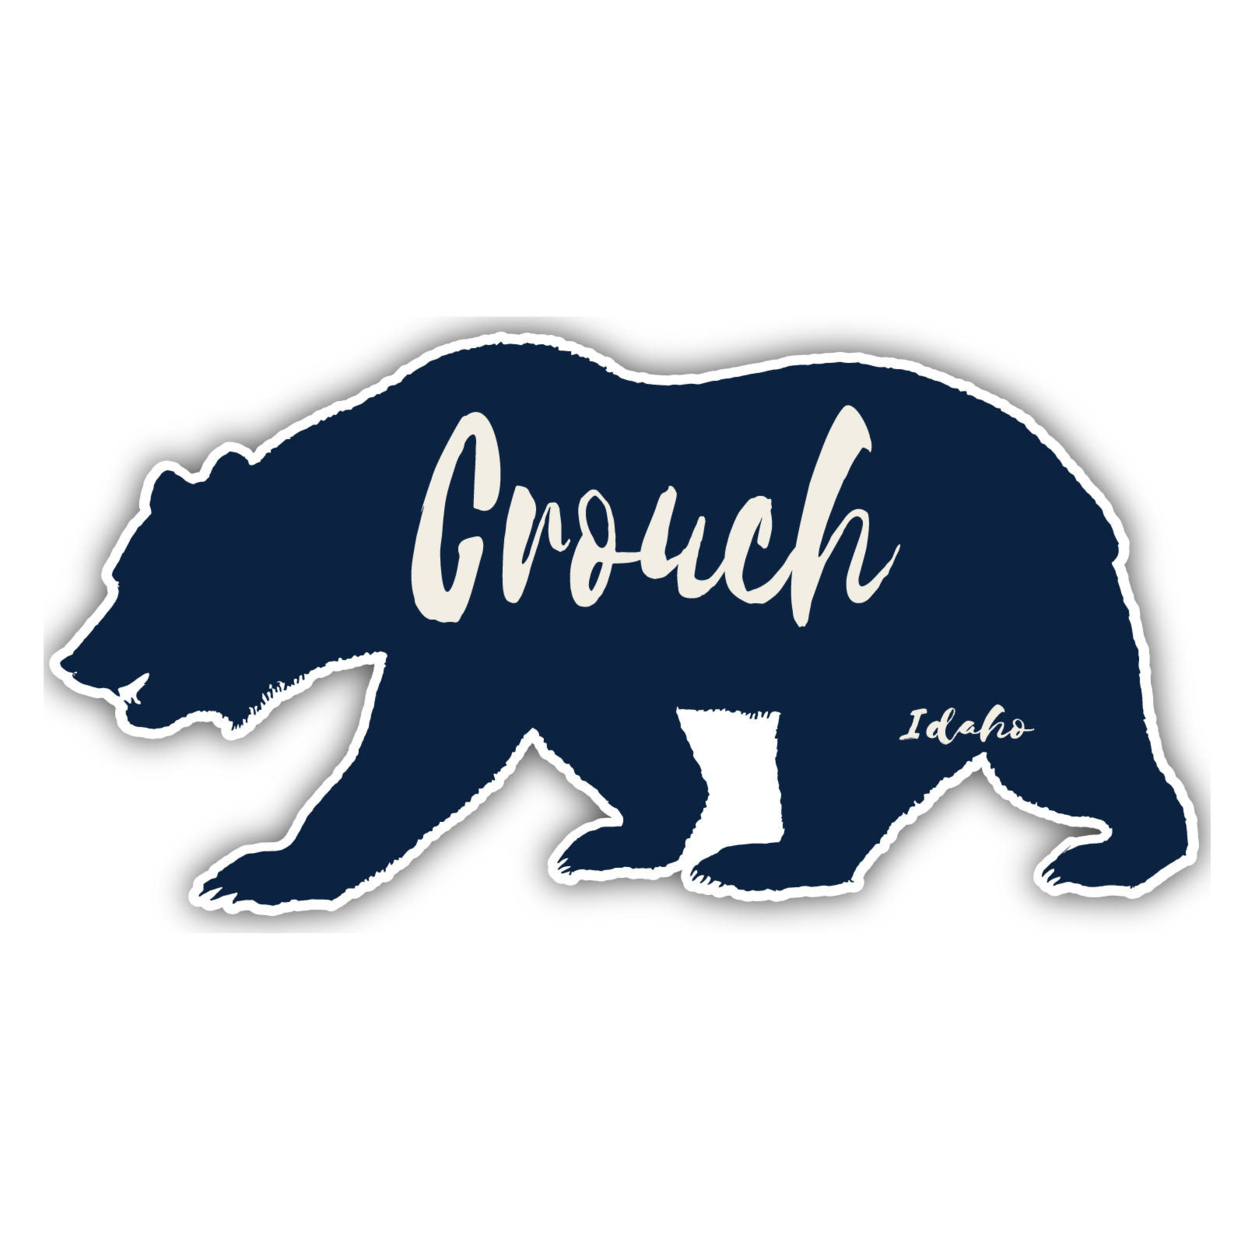 Crouch Idaho Souvenir Decorative Stickers (Choose Theme And Size) - 4-Pack, 10-Inch, Bear